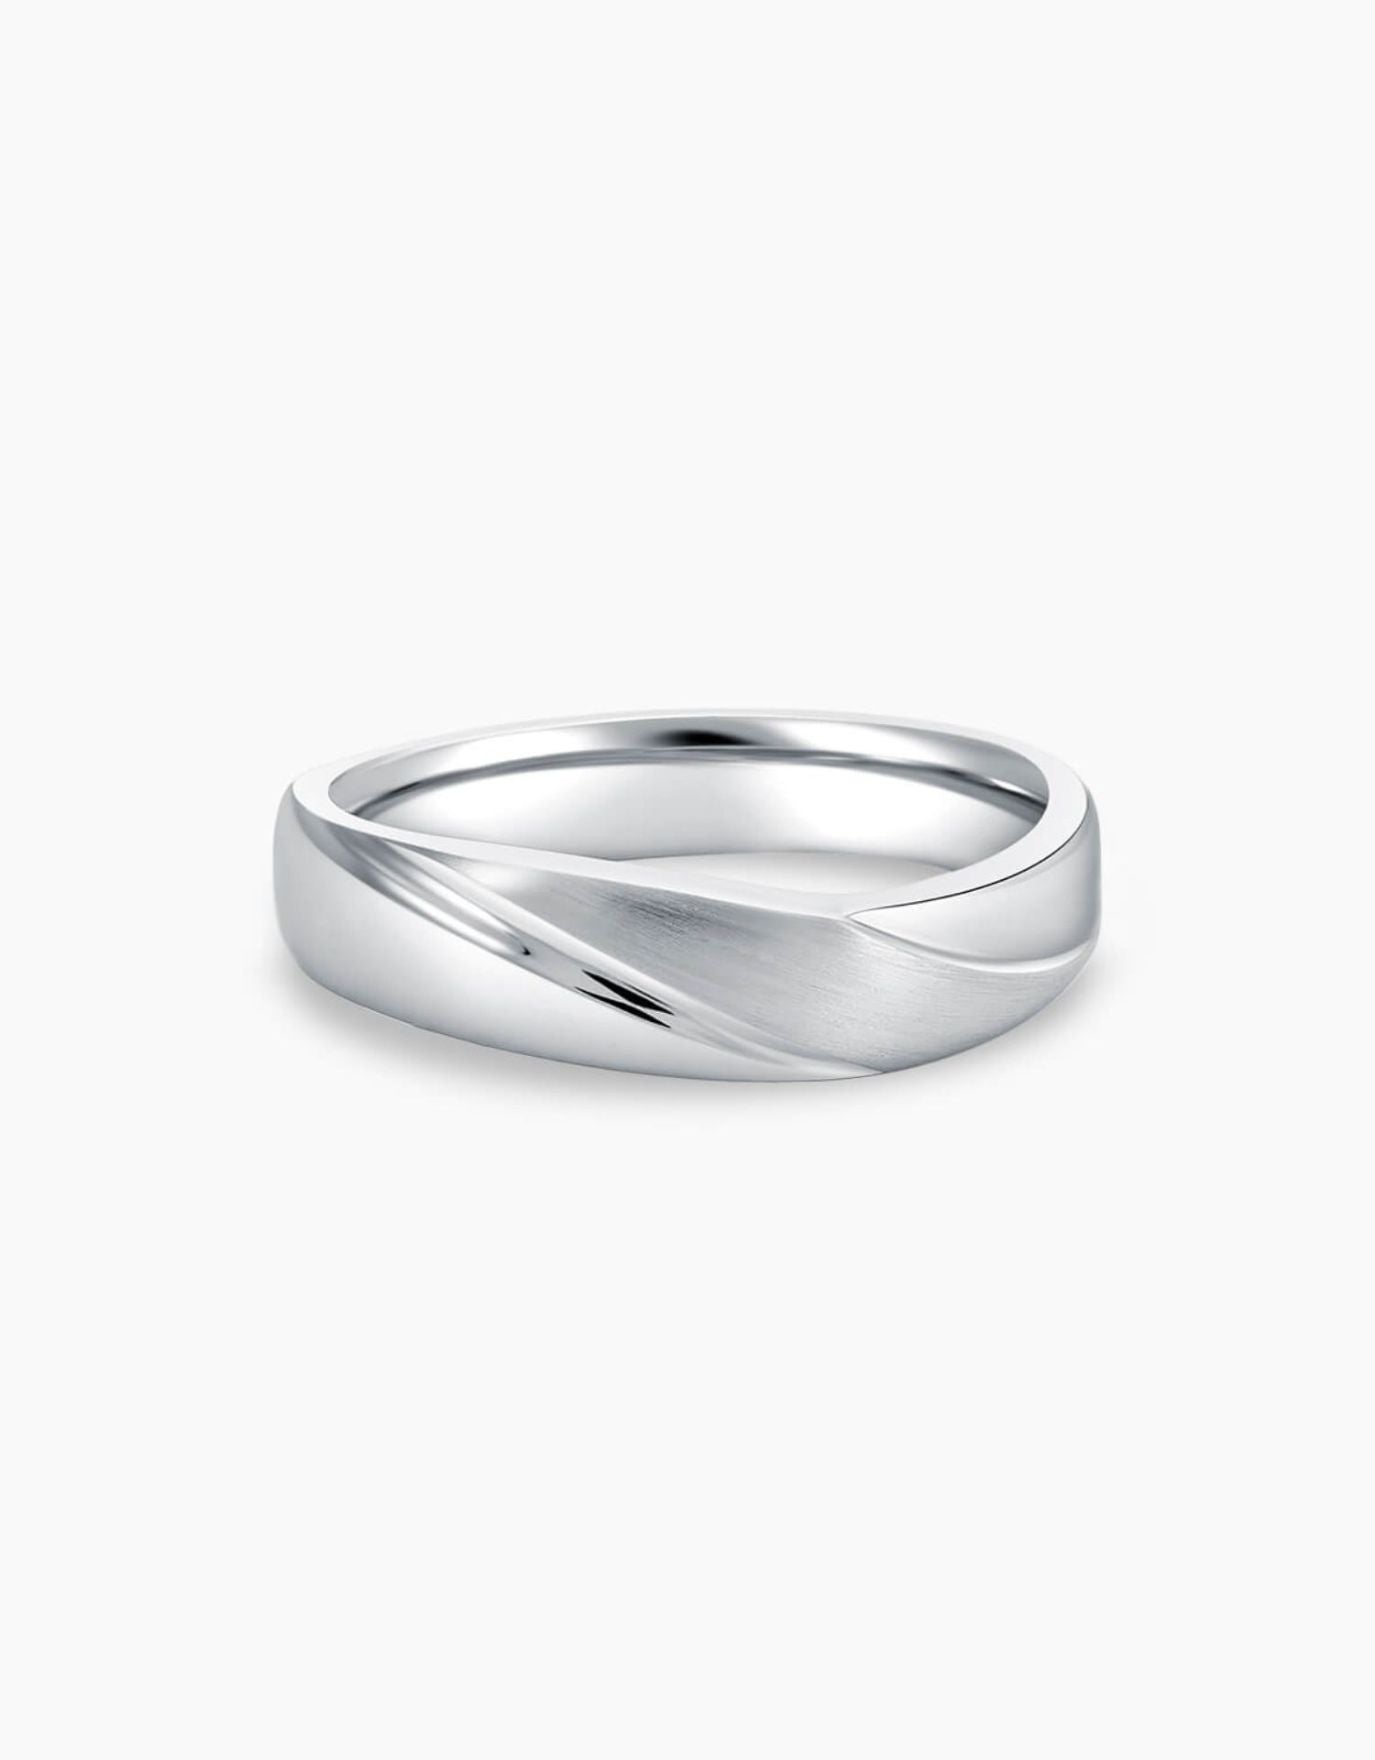 LVC Purete Classic Wedding Band with Layered Matte Finish in Platinum